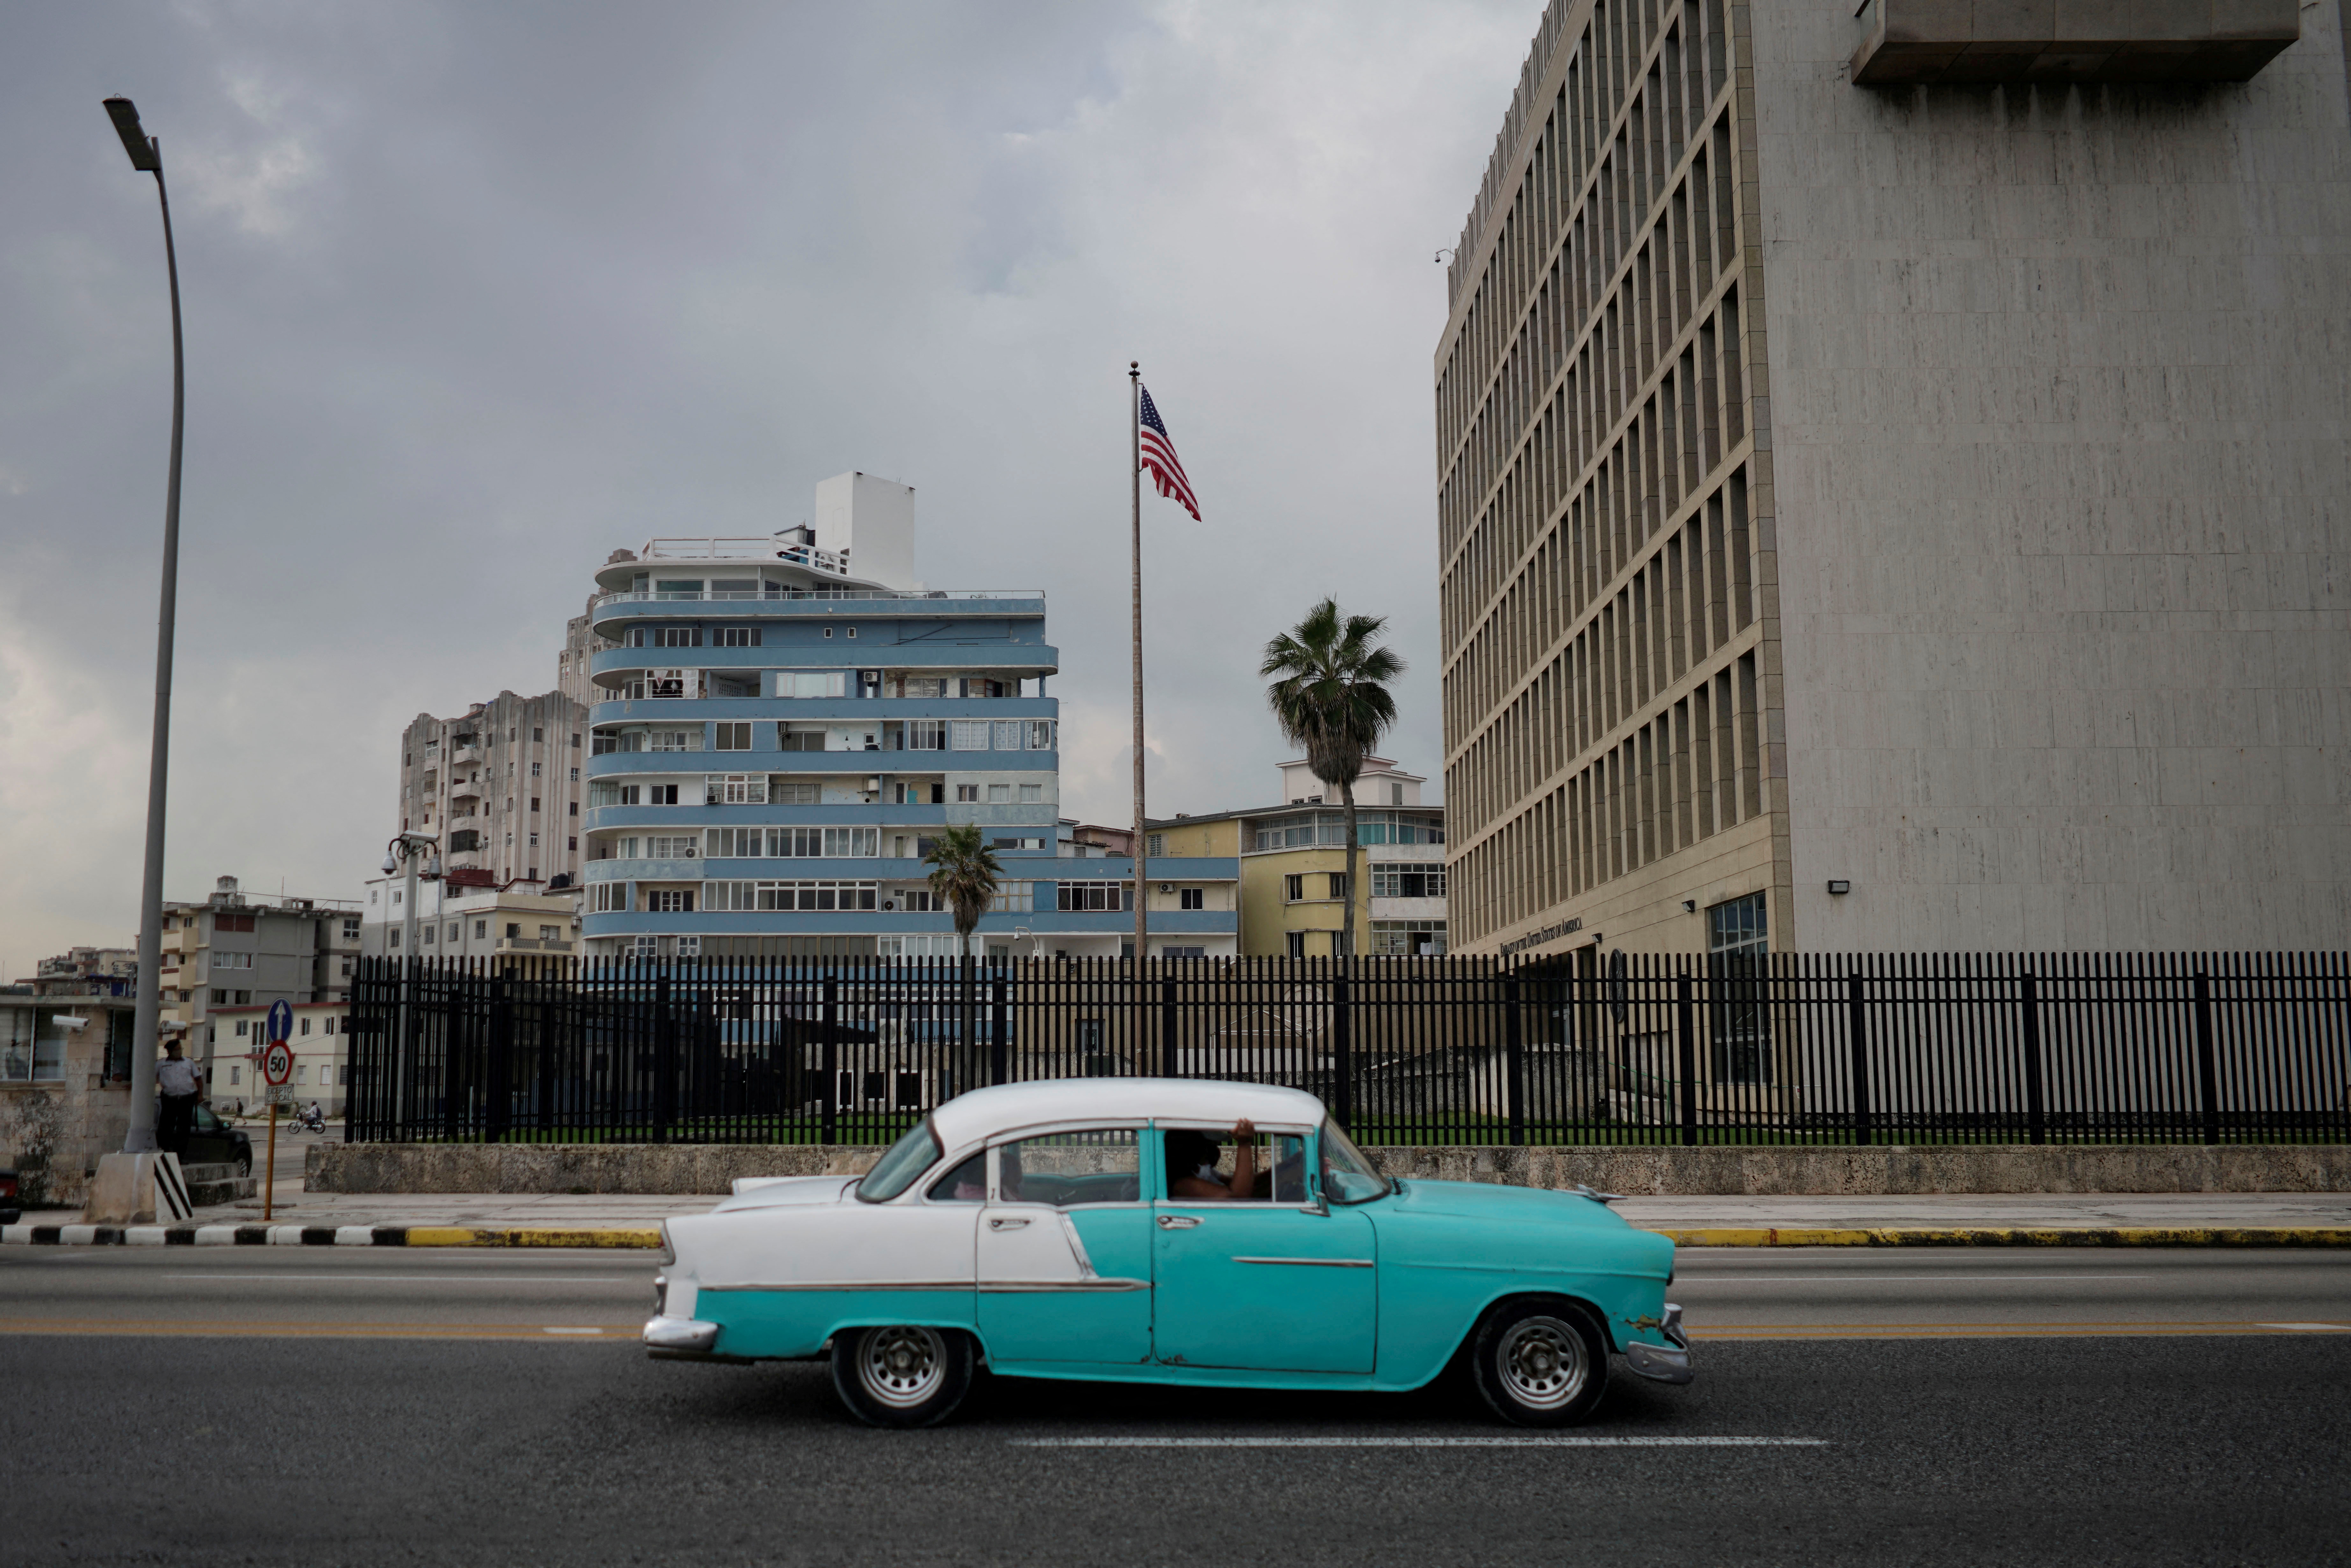 A vintage car passes by the U.S. Embassy in Havana